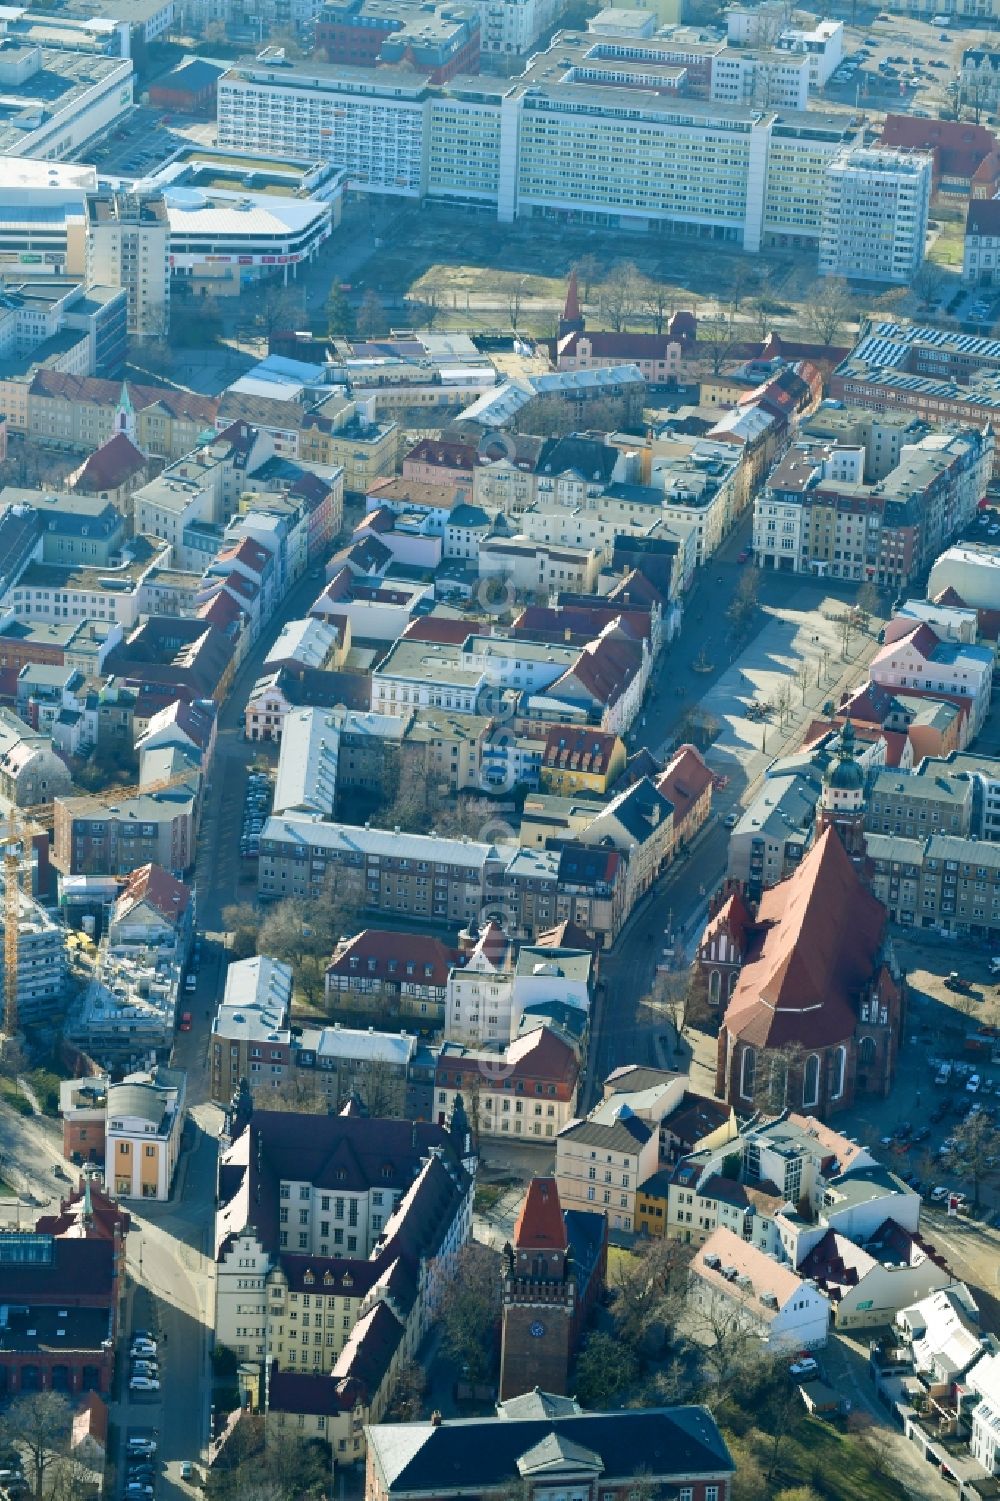 Cottbus from above - The city center in the downtown area in Cottbus in the state Brandenburg, Germany